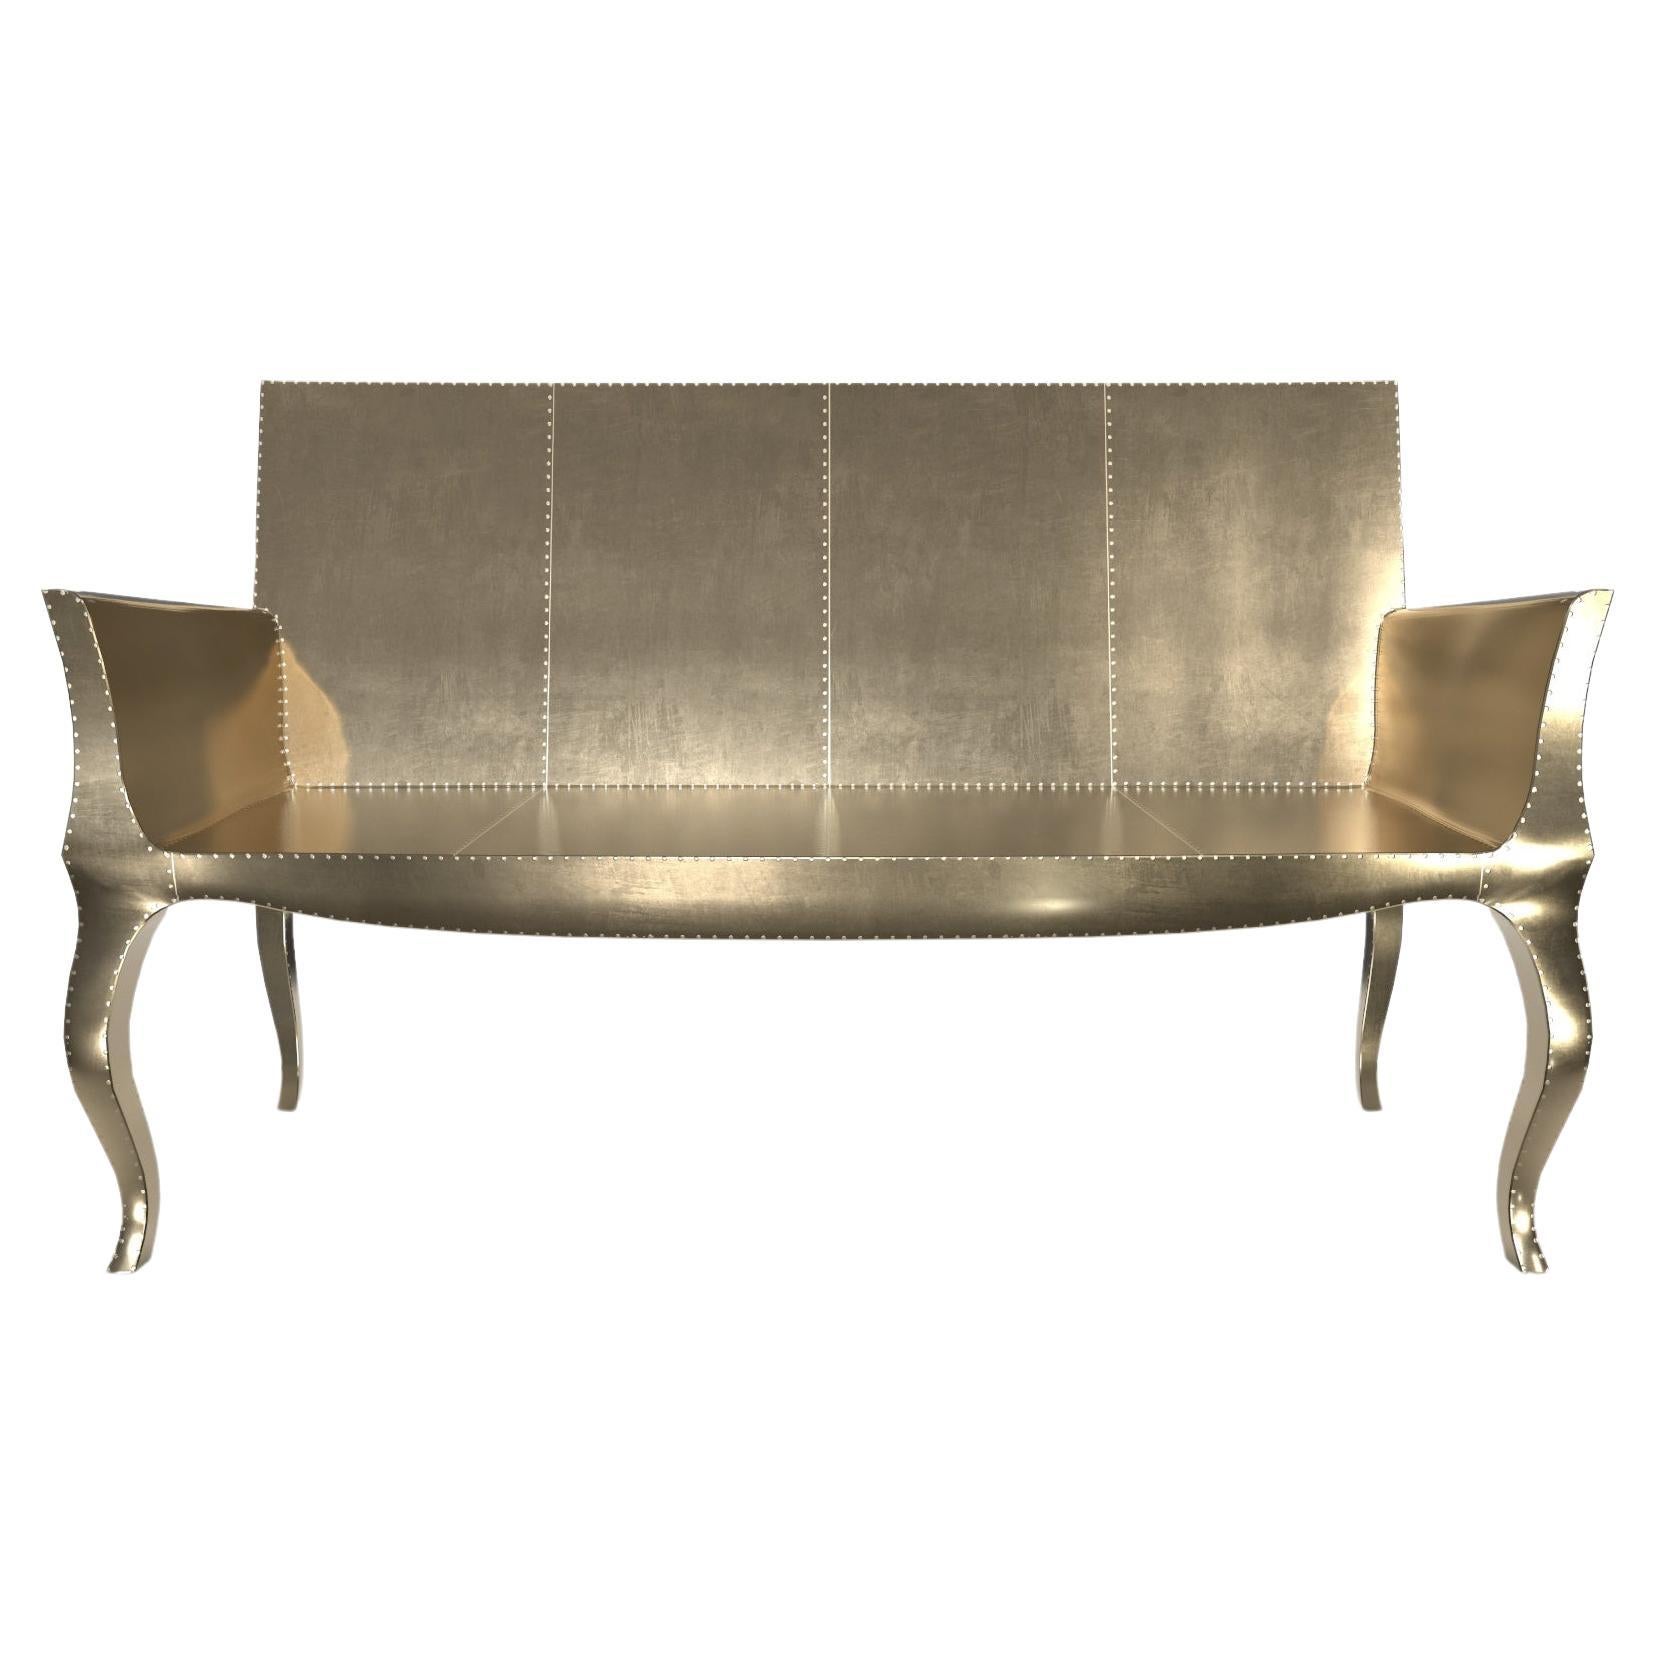 Louise Settee Art Deco Chaise Longues in Smooth Brass by Paul Mathieu For Sale